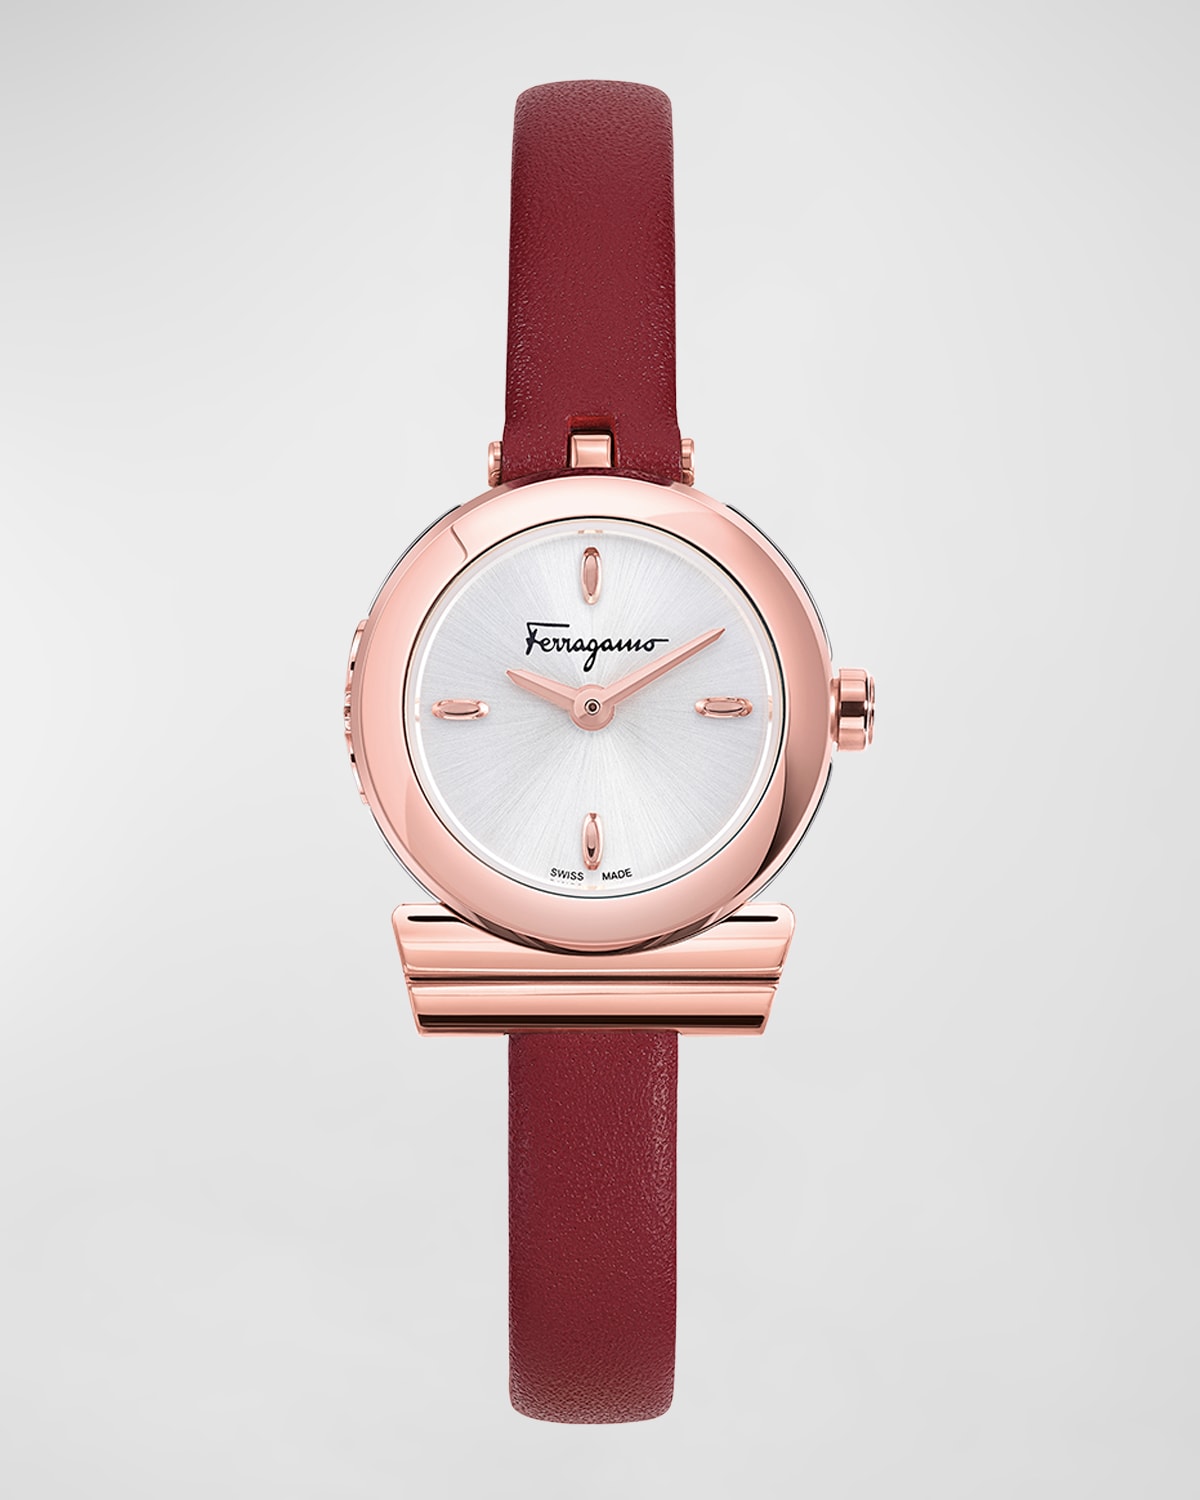 FERRAGAMO 22.5MM GANCINO WATCH WITH LEATHER STRAP, ROSE GOLD/RED